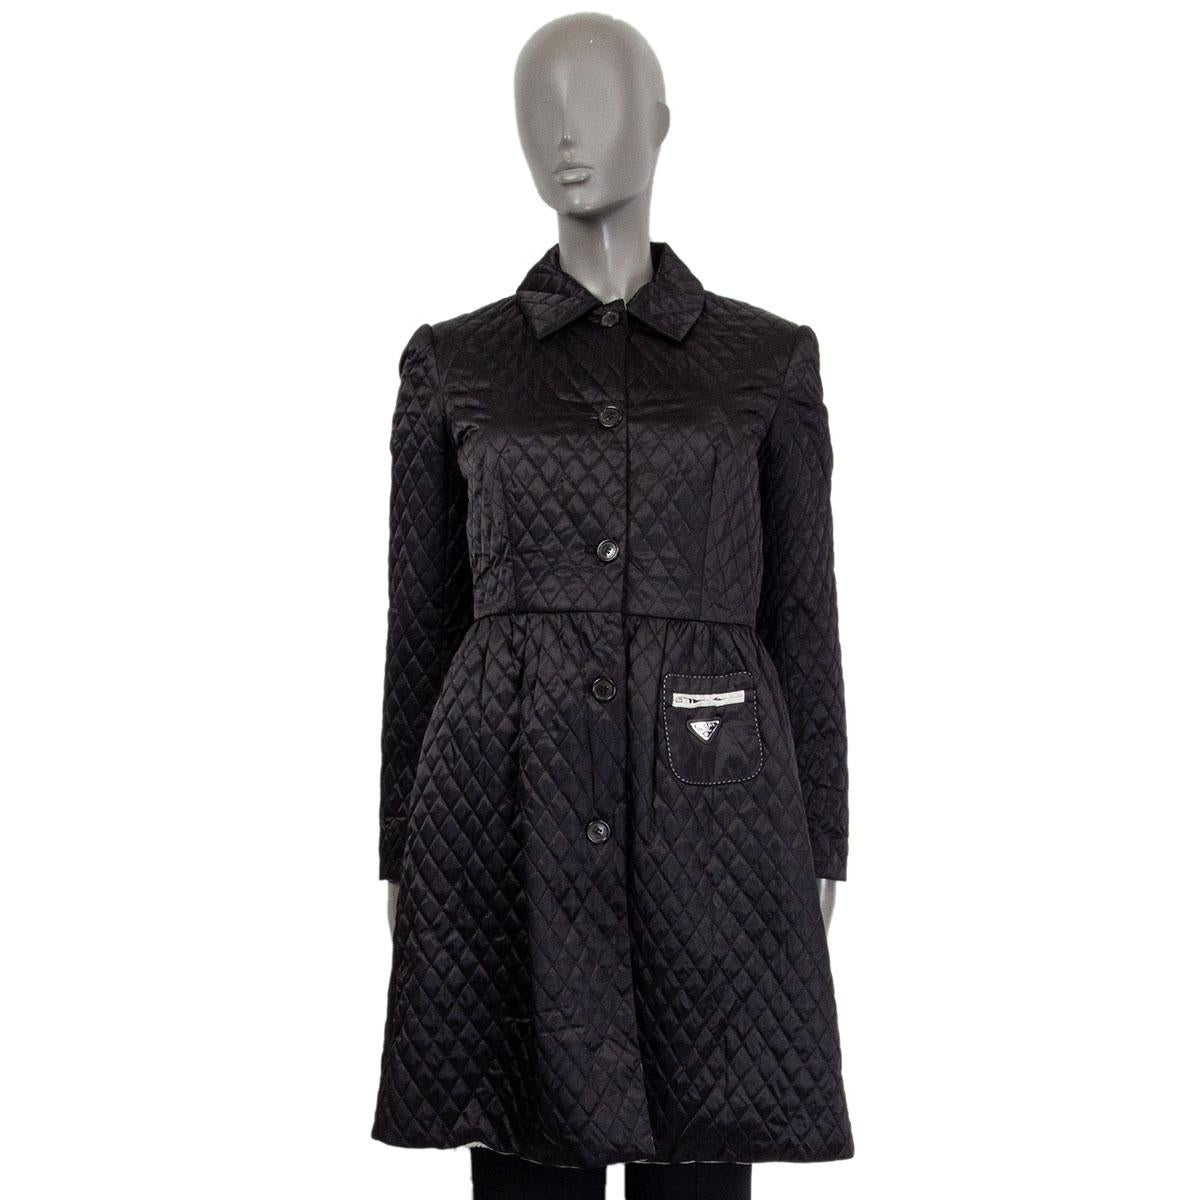 
100% authentic Prada quilted belted trench coat in black polyamide (100%) with a cut at the waist-line and a small zipped pocket with logo-tag on the front. Closes with six buttons and with a belt on the front. Lined in light gray polyamide (100%).